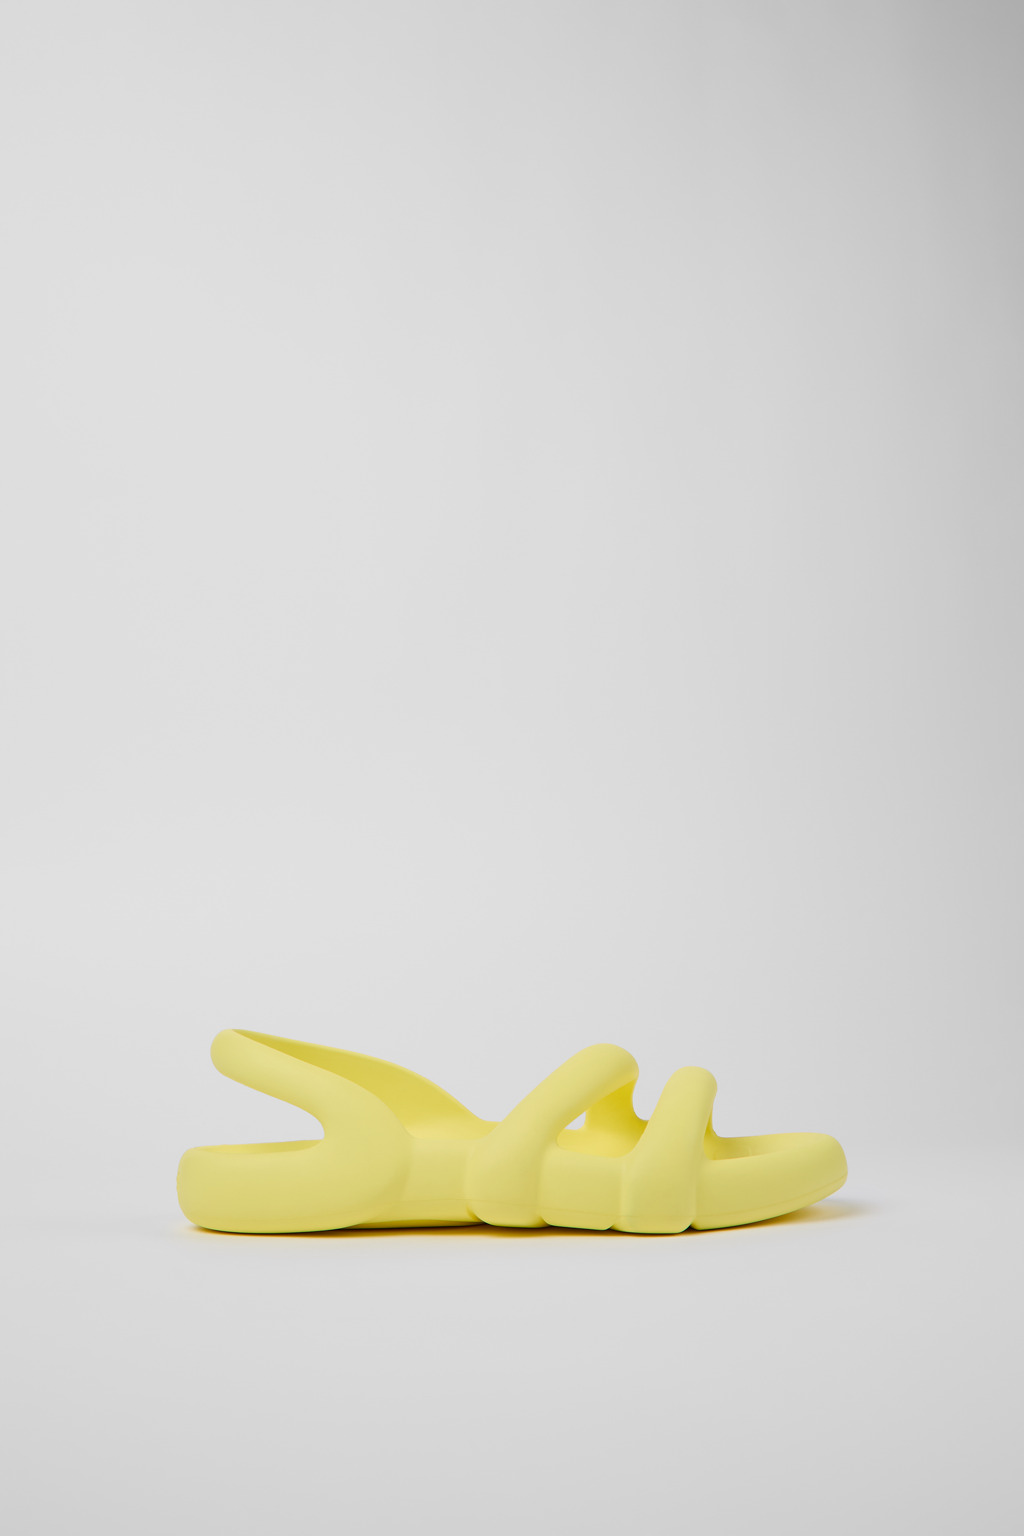 Kobarah Yellow Sandals for Women - Spring/Summer collection 